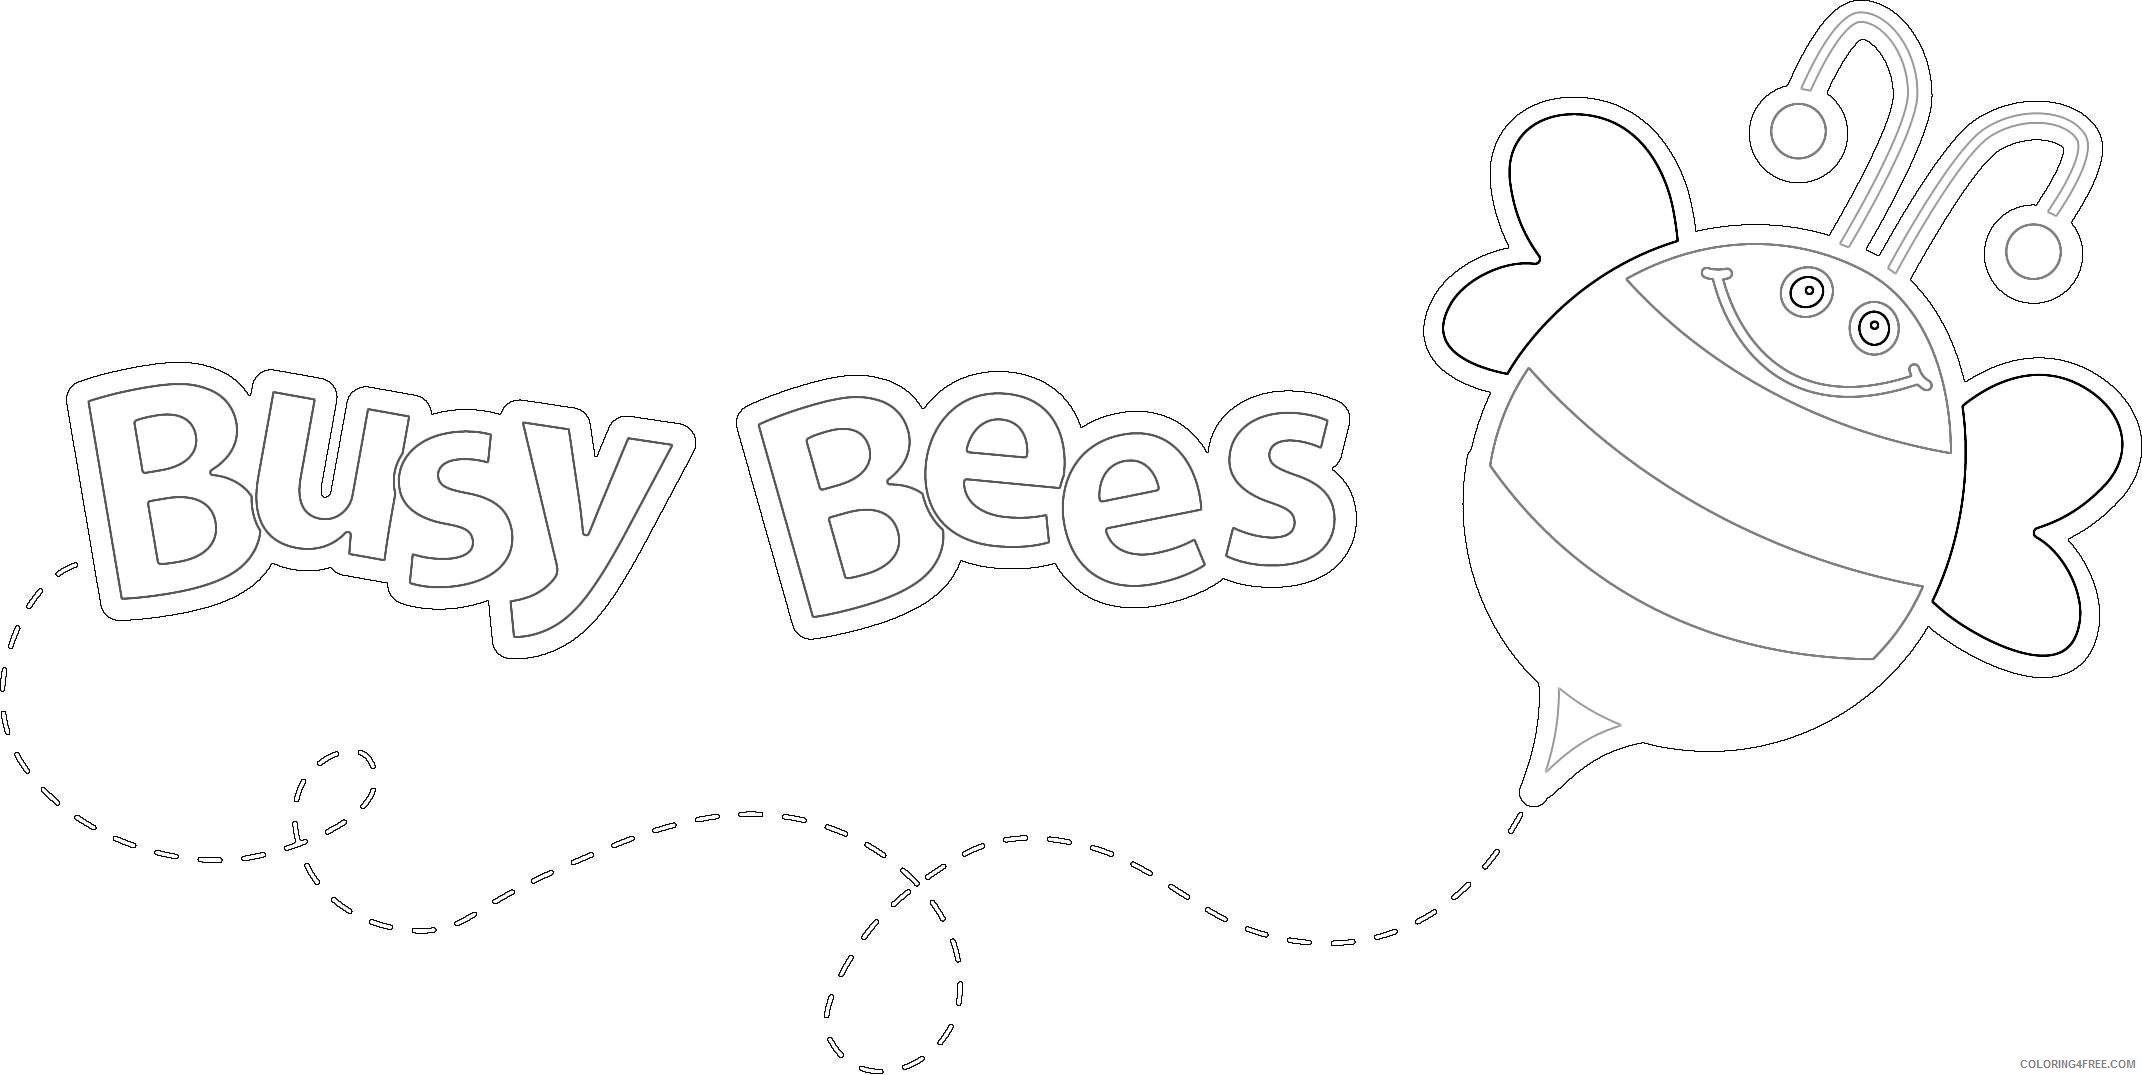 busy bee masters2marathons cPAOBP coloring